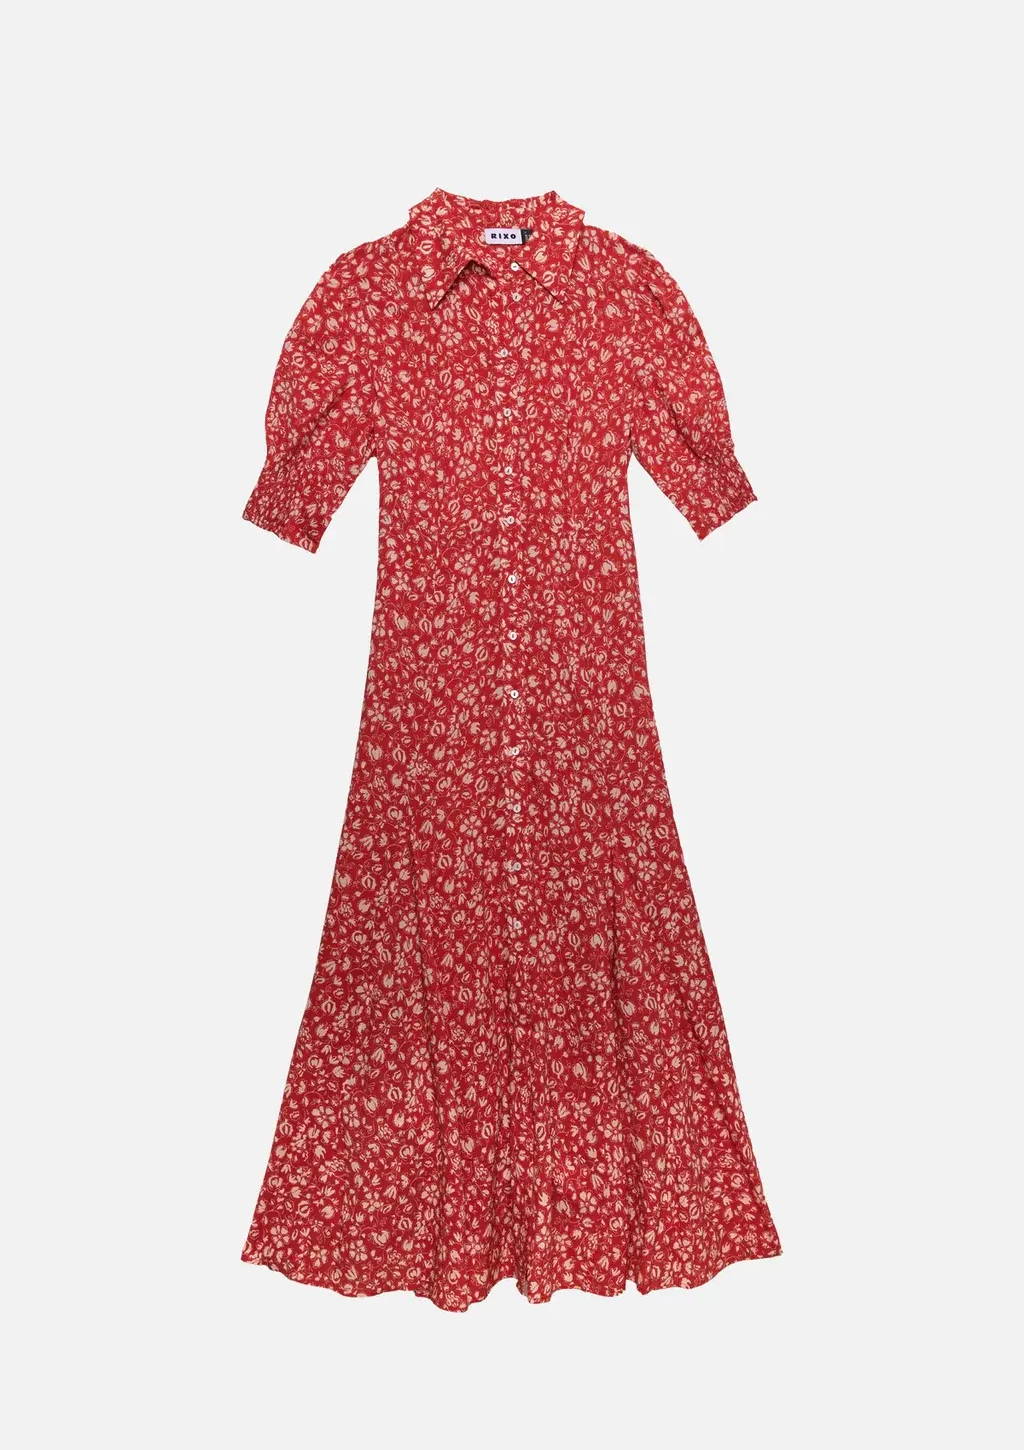 Rixo Bloom Dress in Amelie Floral Red.